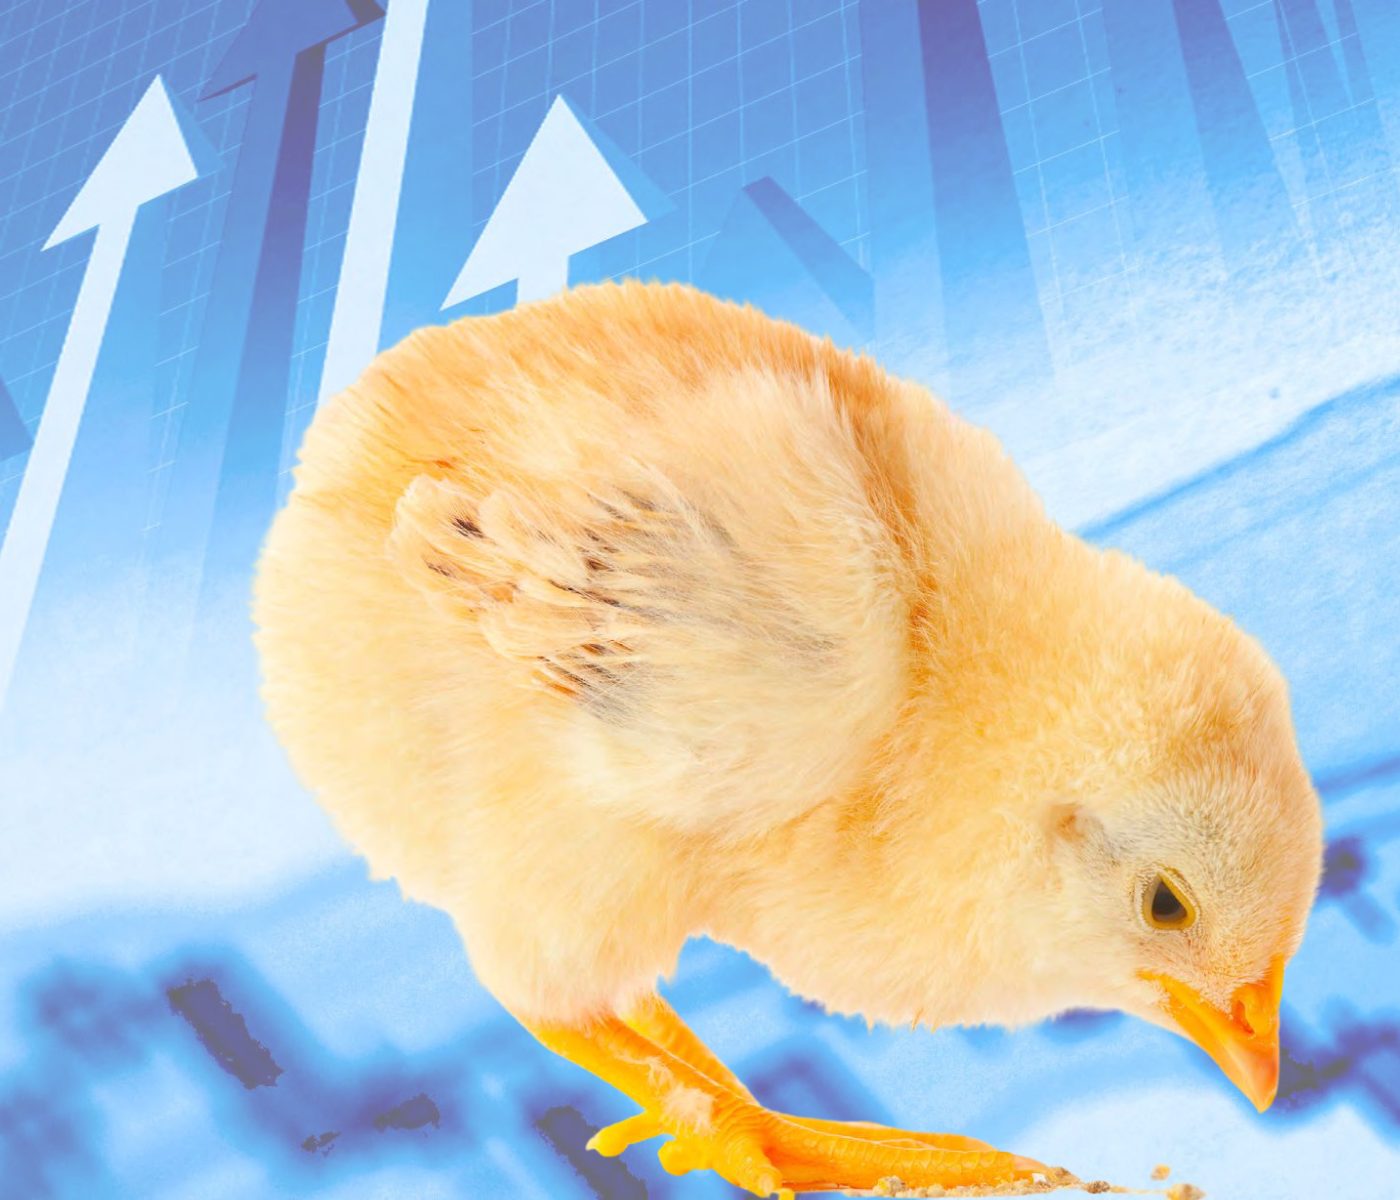 Balanced diets for poultry: Ensuring uniformity in mixing